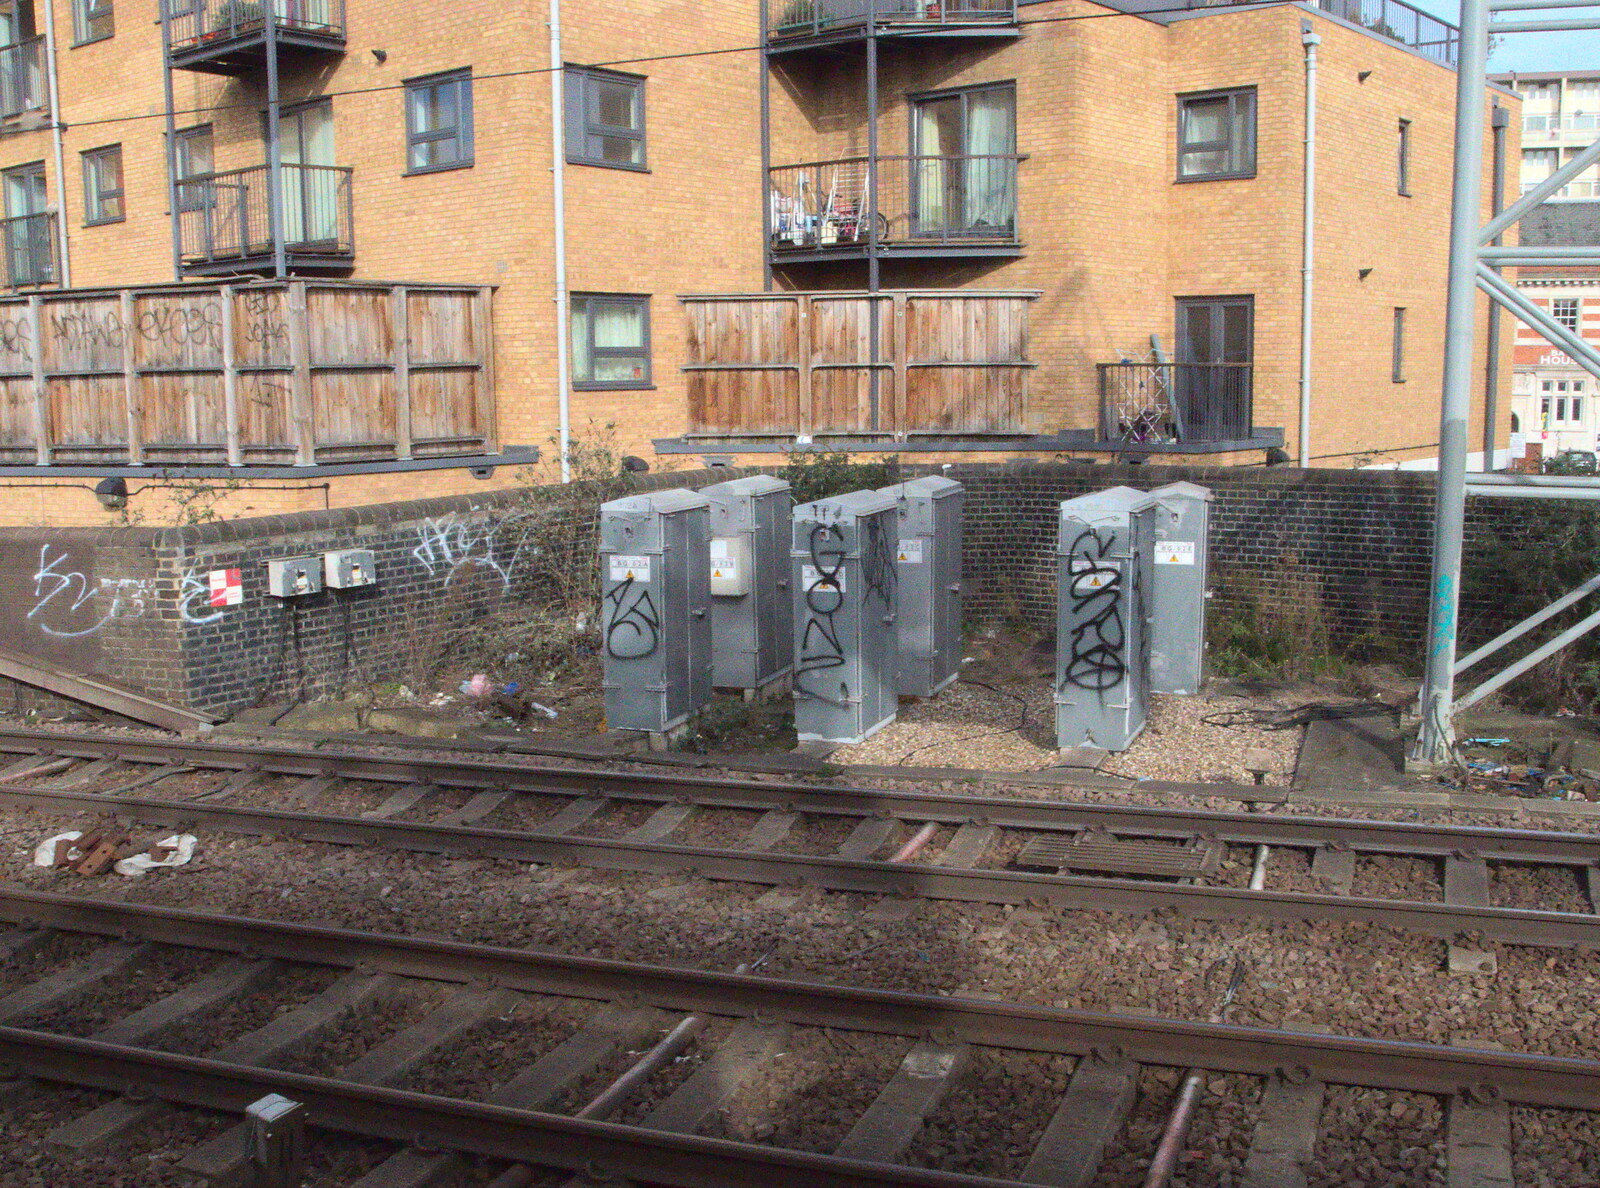 Tagged signalling boxes from The Mobile Train Office, Diss to London - 5th March 2015